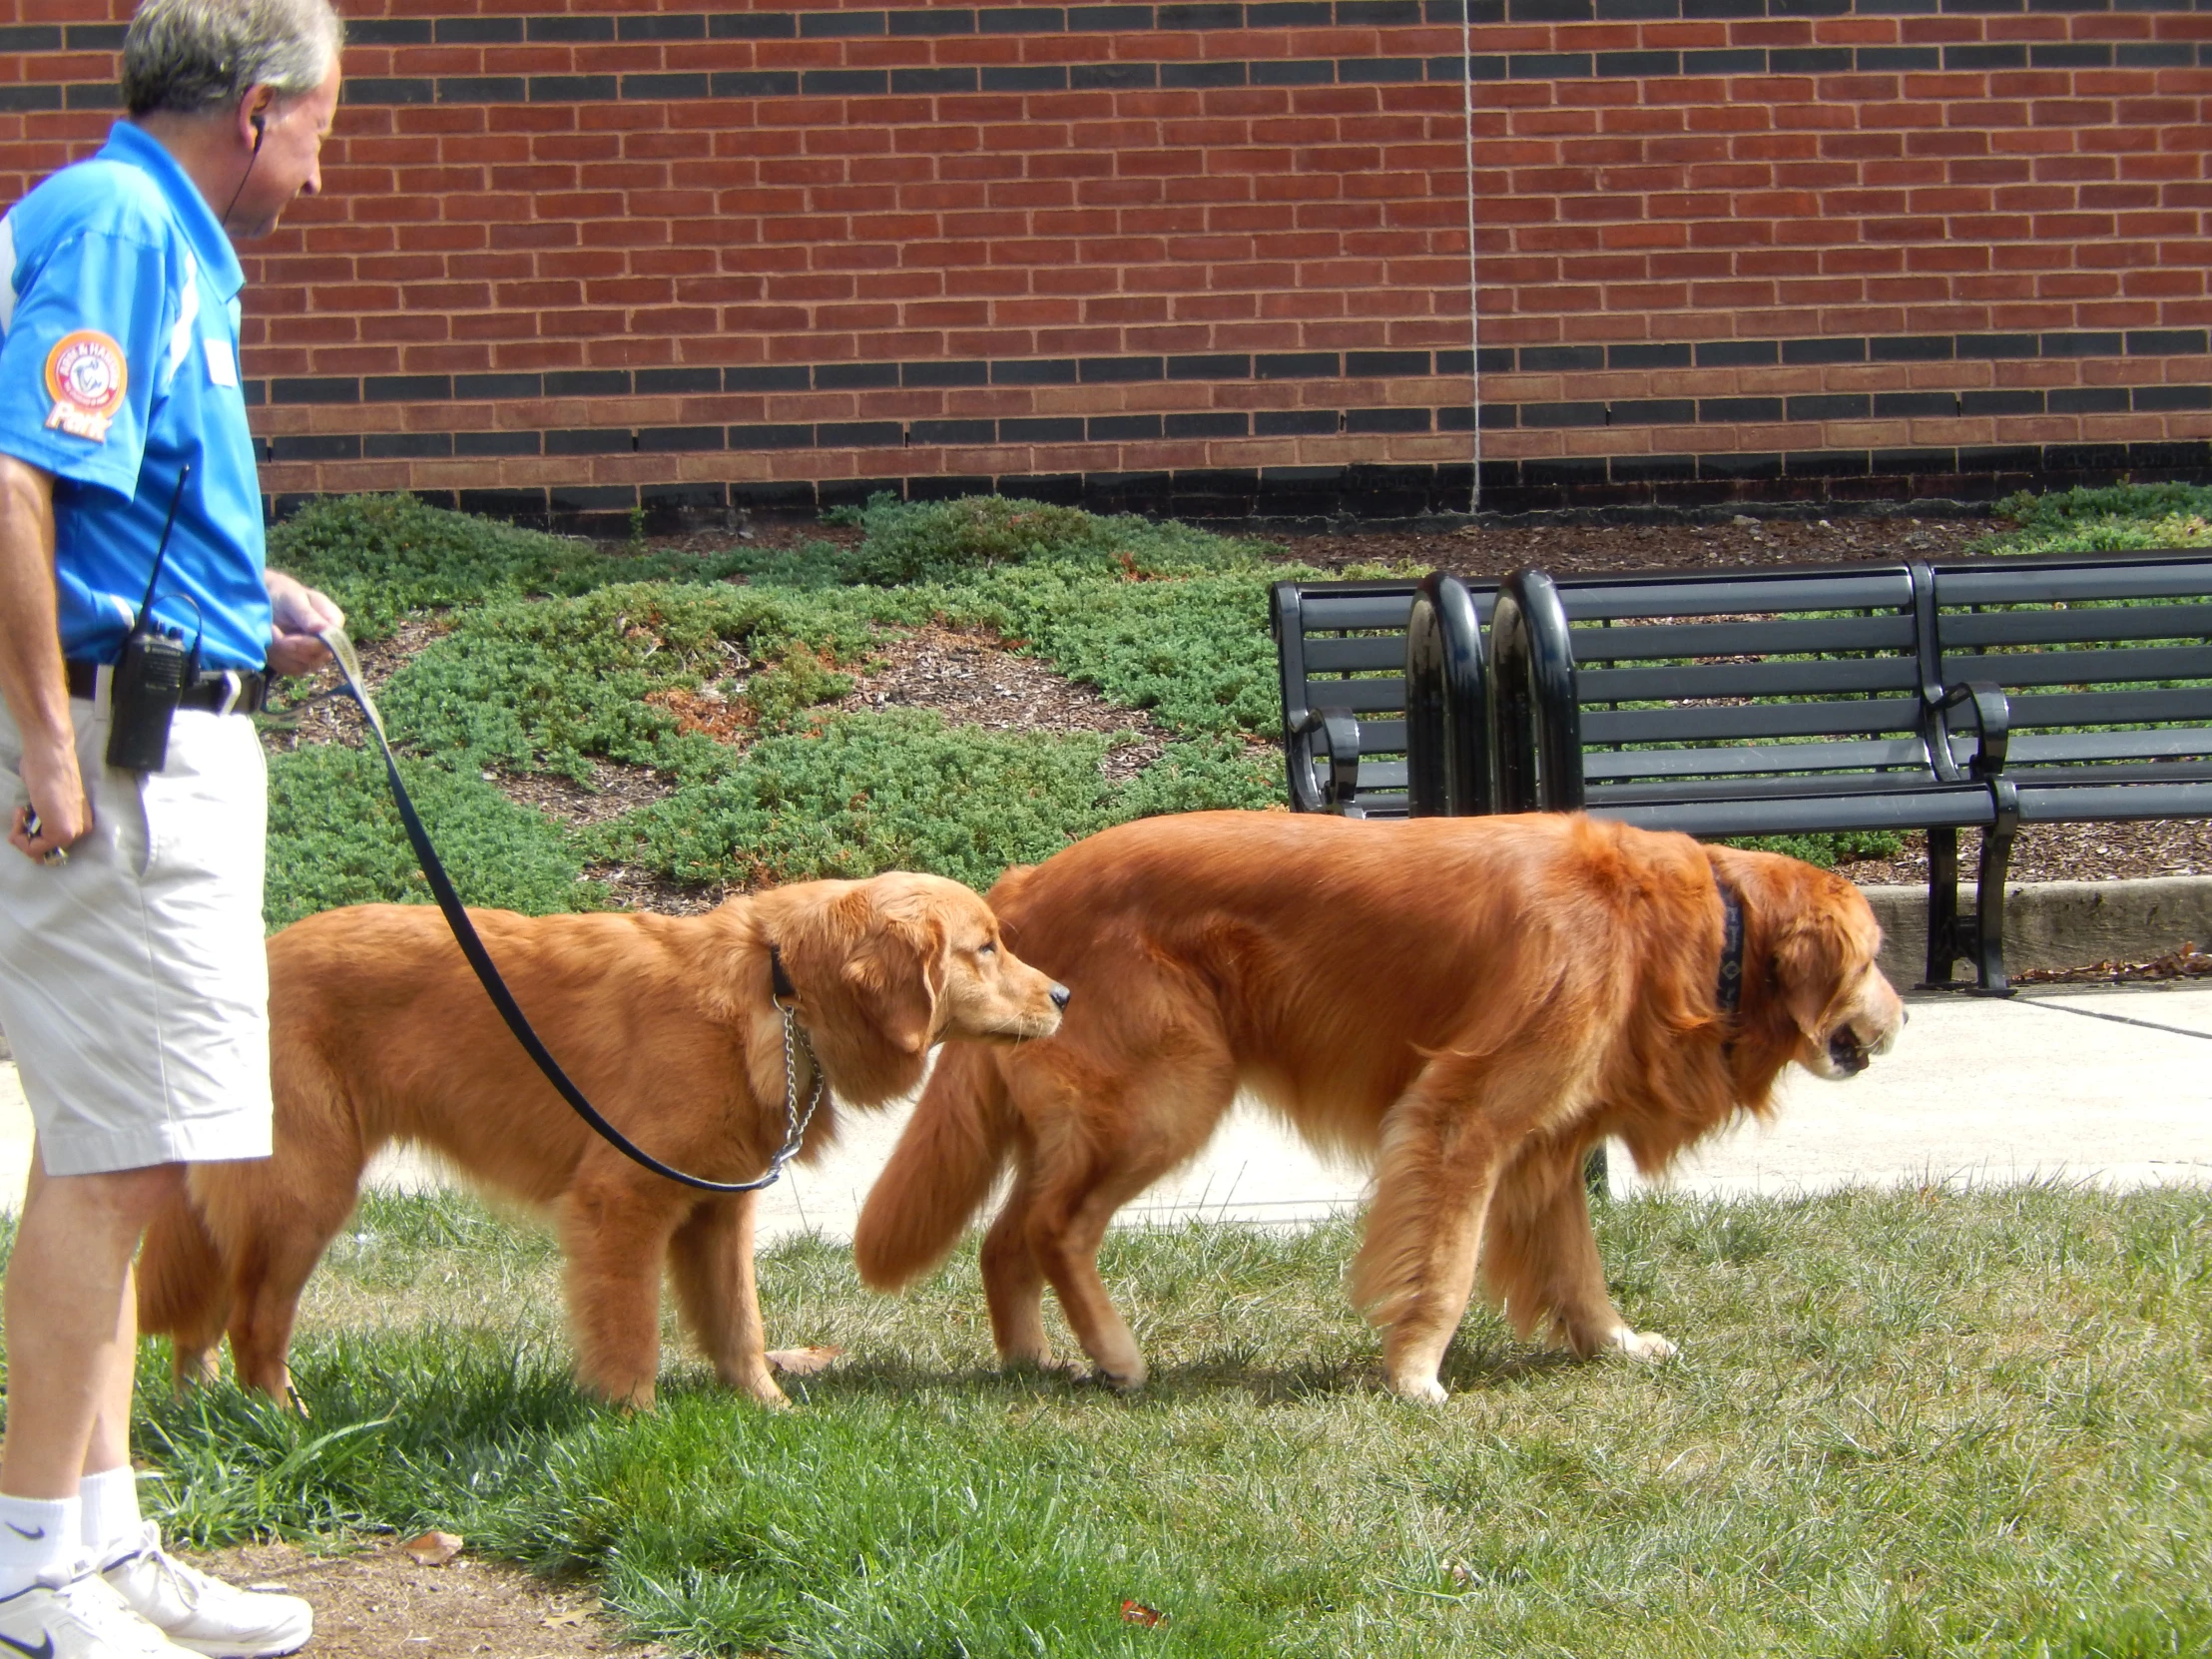 two dogs are tied to the park bench while a man is walking them